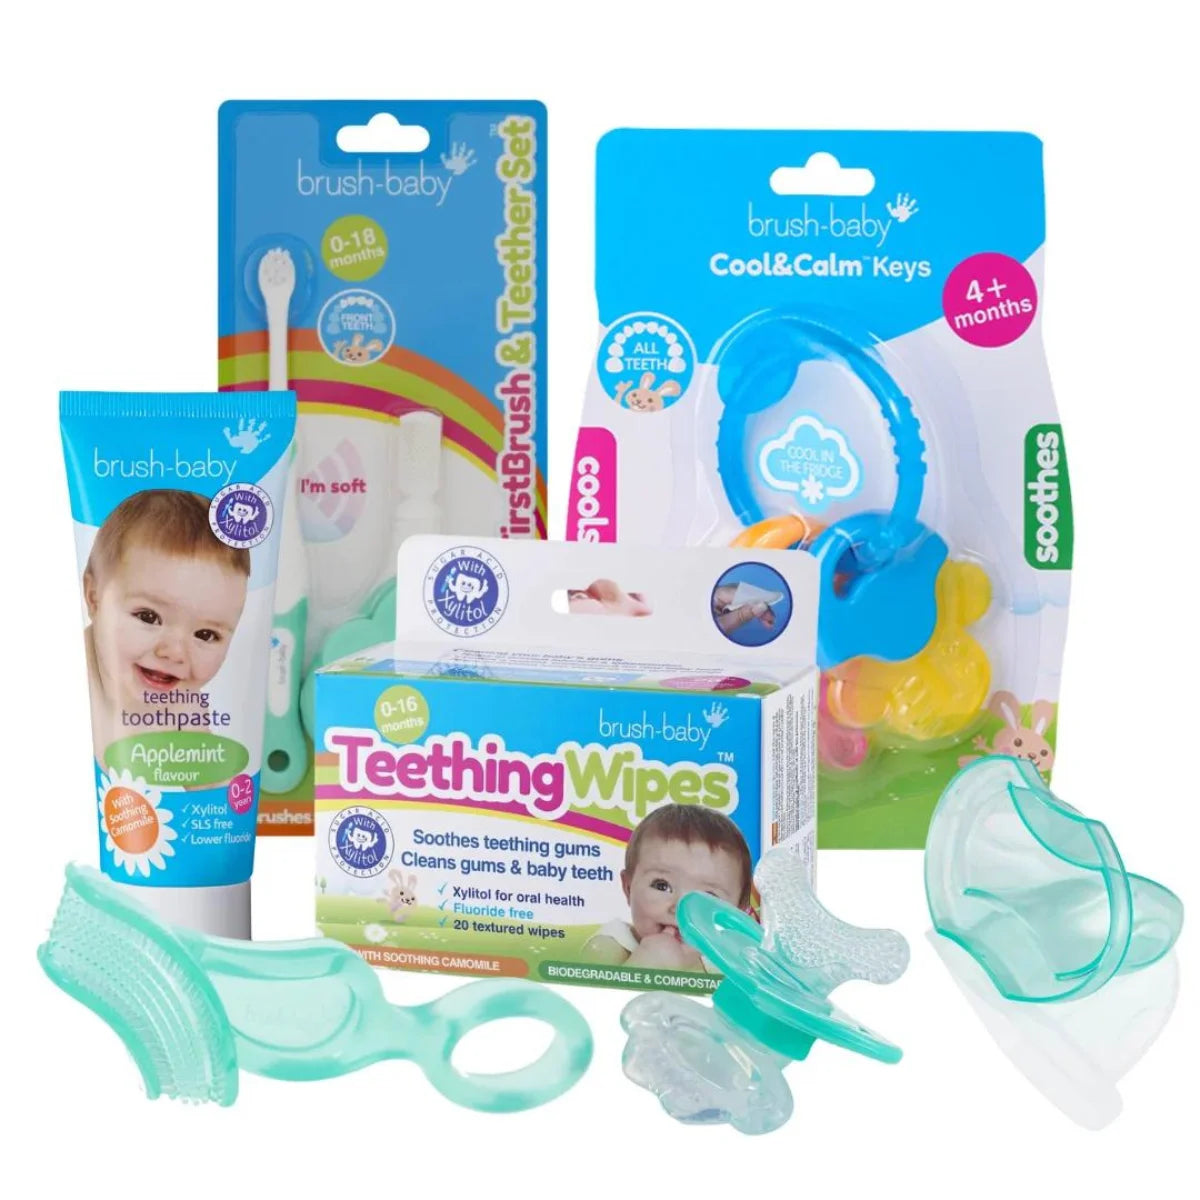 ultimate teething survival kit includes pack of brush baby teething wipes, frontease teal baby teether, teal coloured chewable first baby toothbrush & teether for babies, applemint teething baby toothpaste, cool&calm teething keys and teal and white coloured first toothbrush and teether set